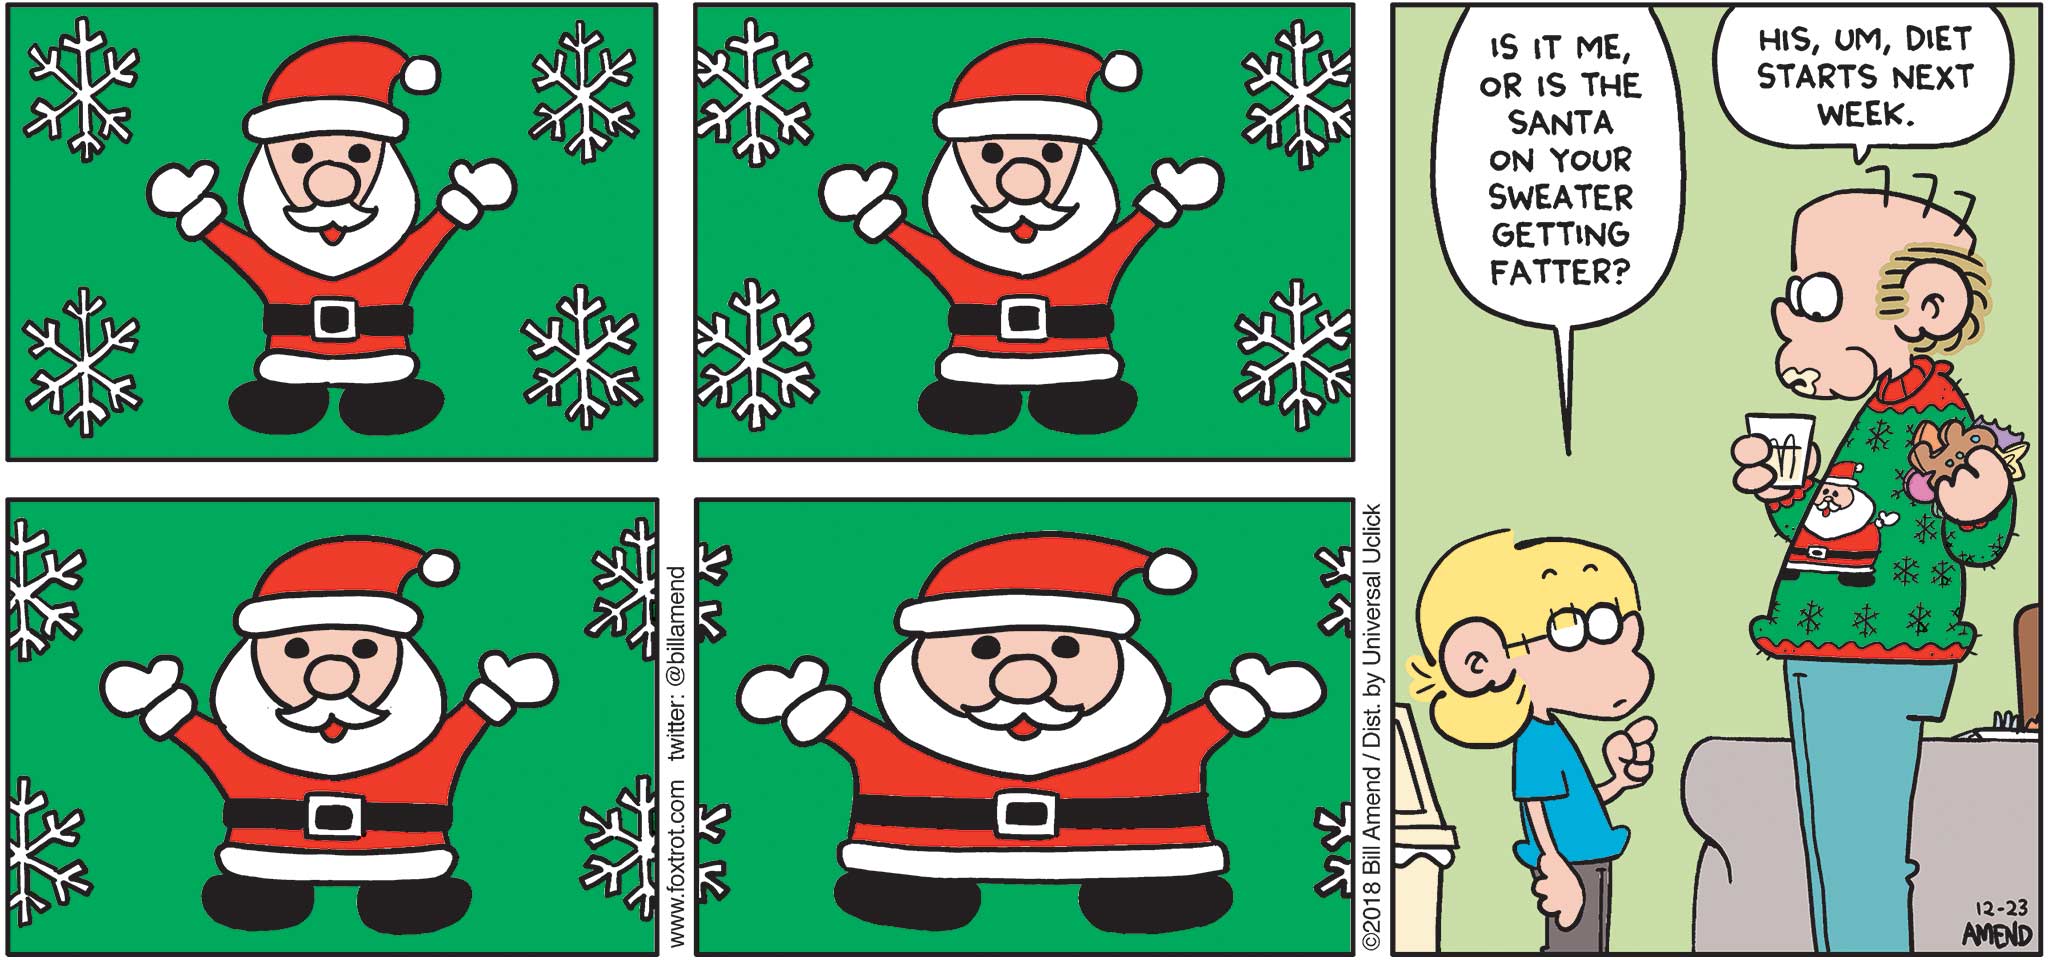 FoxTrot by Bill Amend - "Holiday Stretch" published December 23, 2018 - [Panels 1-4 feature gradual close-ups of Roger's Santa sweater] Jason says: Is it me, or is the Santa on your sweater getting fatter? Roger says: His, um, diet starts next week.